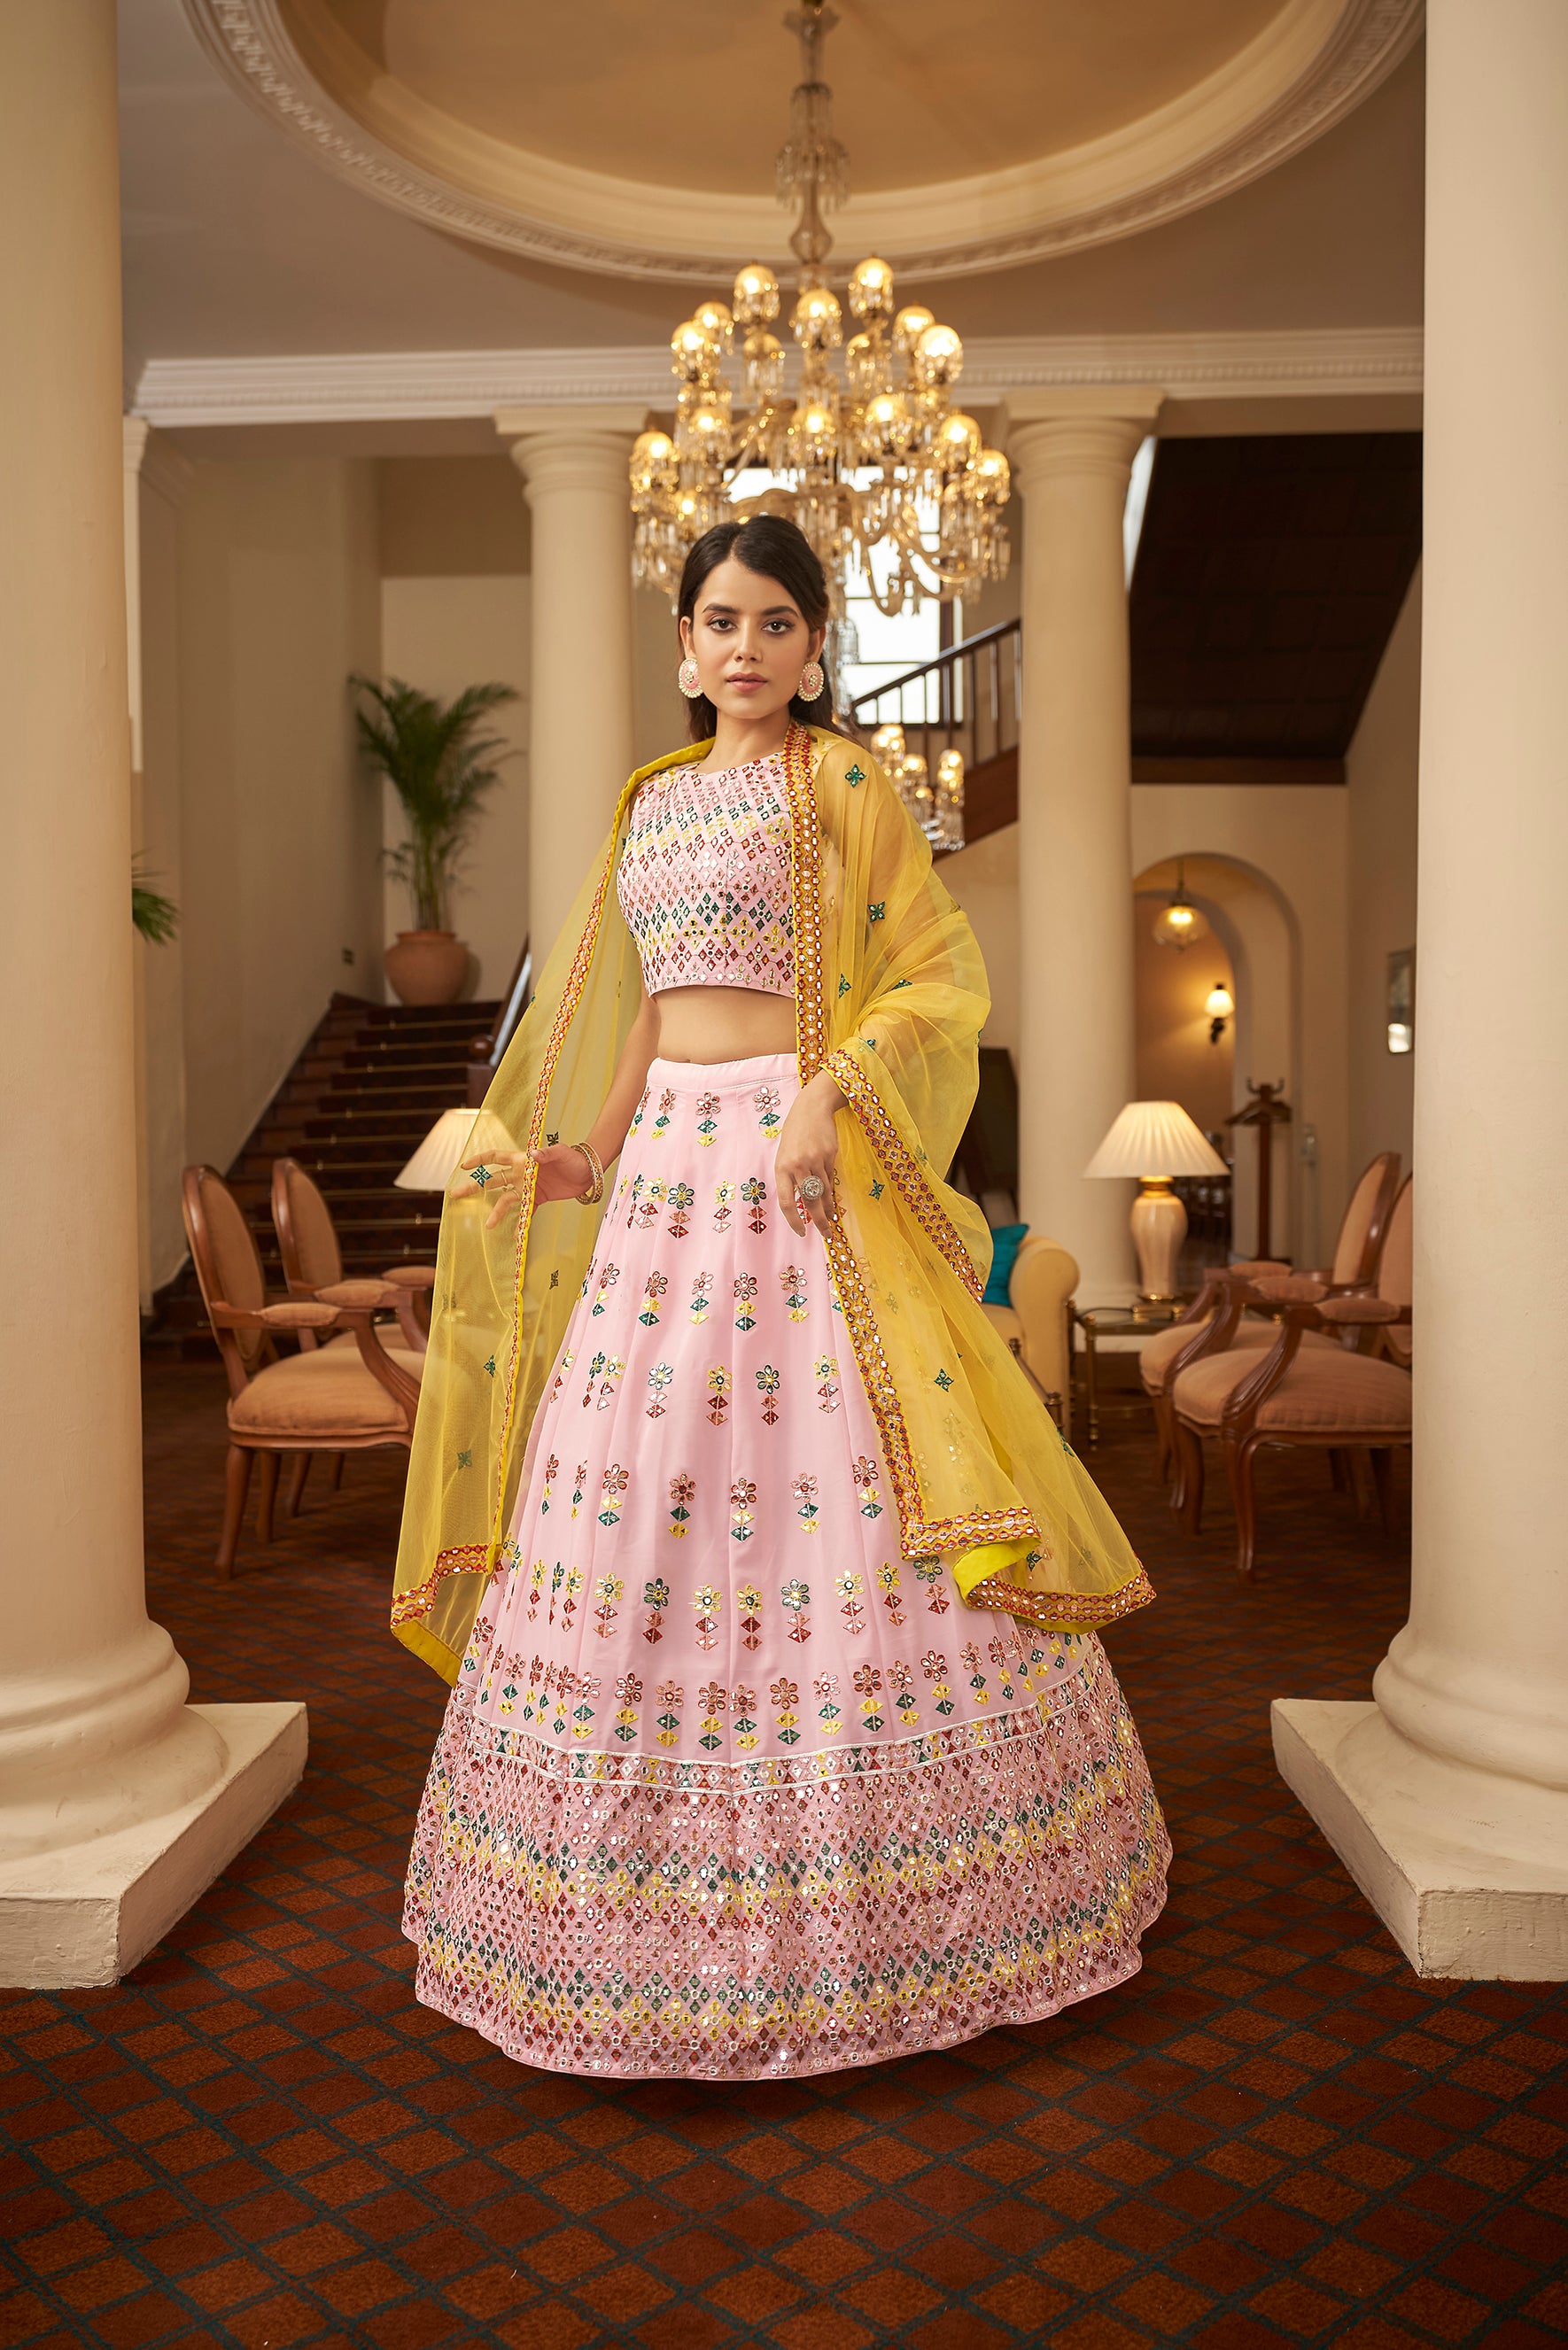 Bride glowing in Shimmery Yellow Lehenga for her D-Day... ♥️ | Bridal  looks, Bridal inspiration, Bridal